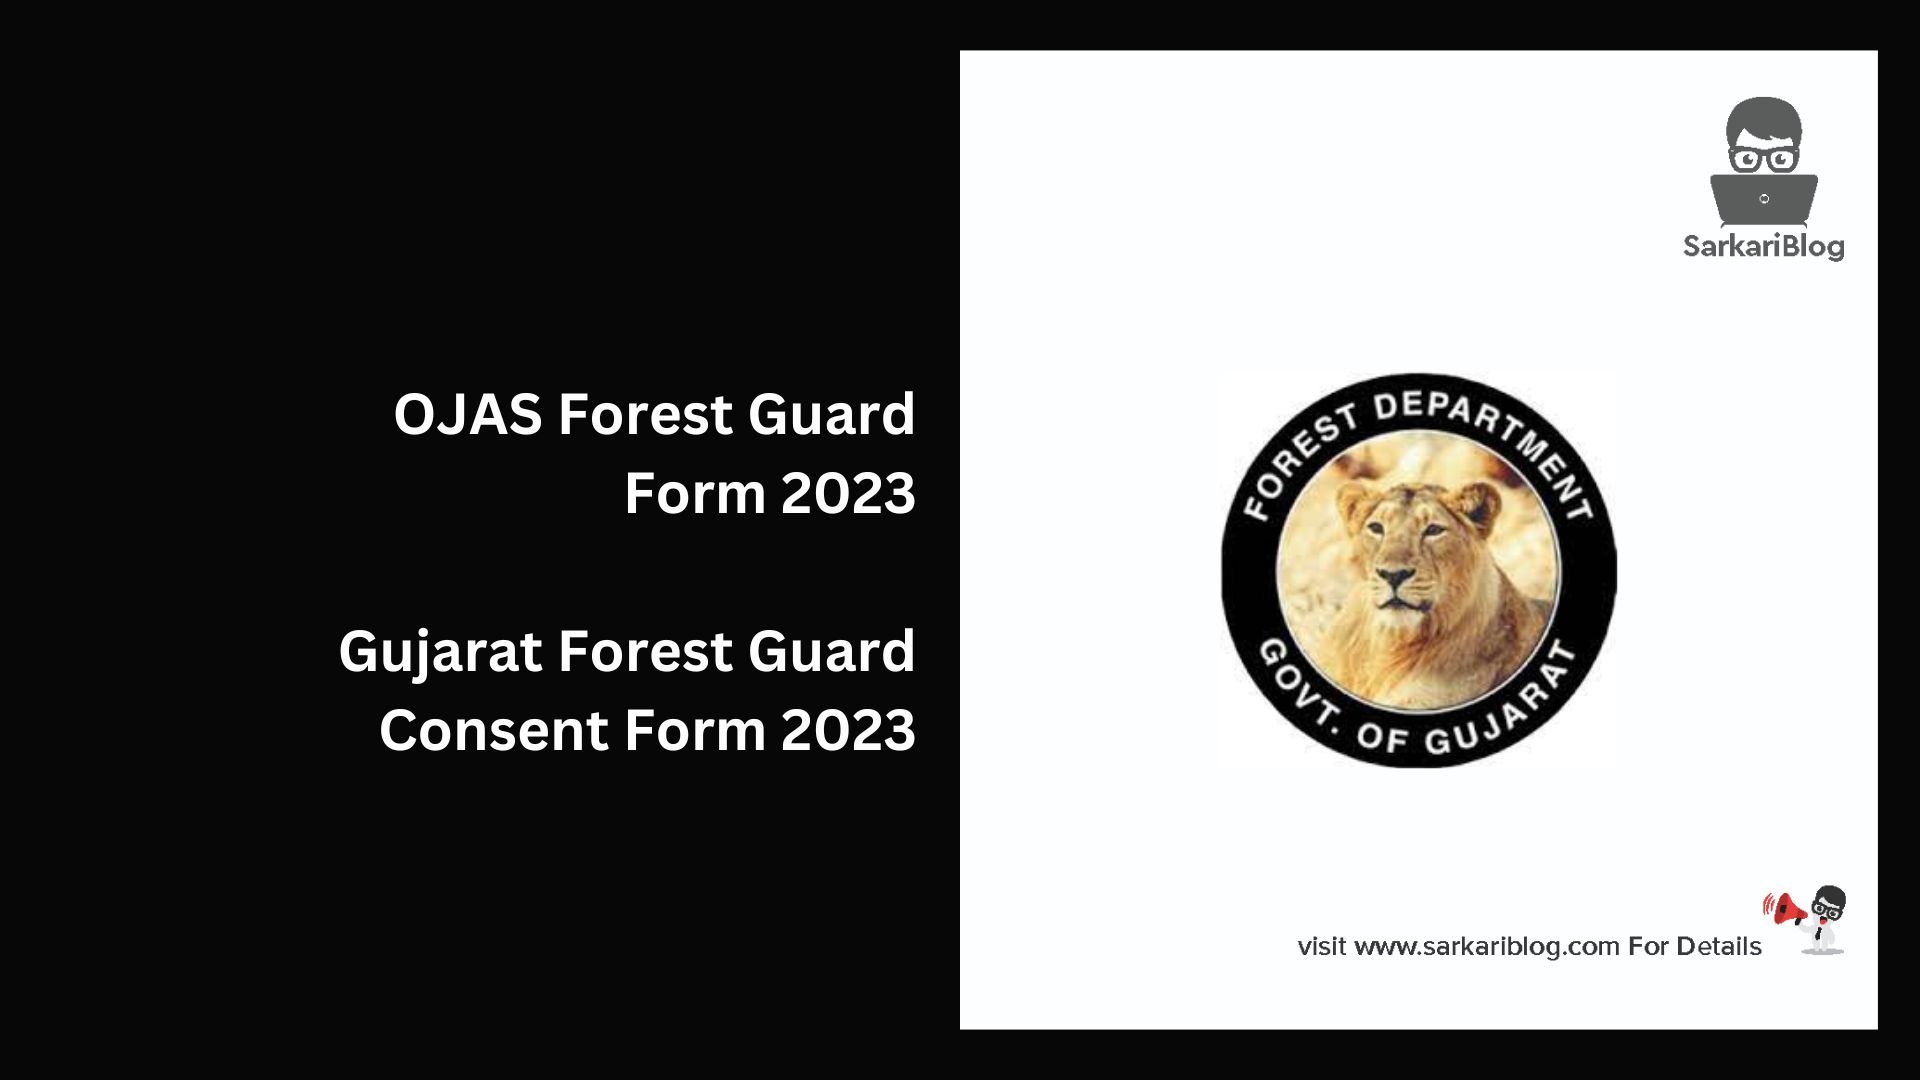 OJAS Forest Guard Form 2023